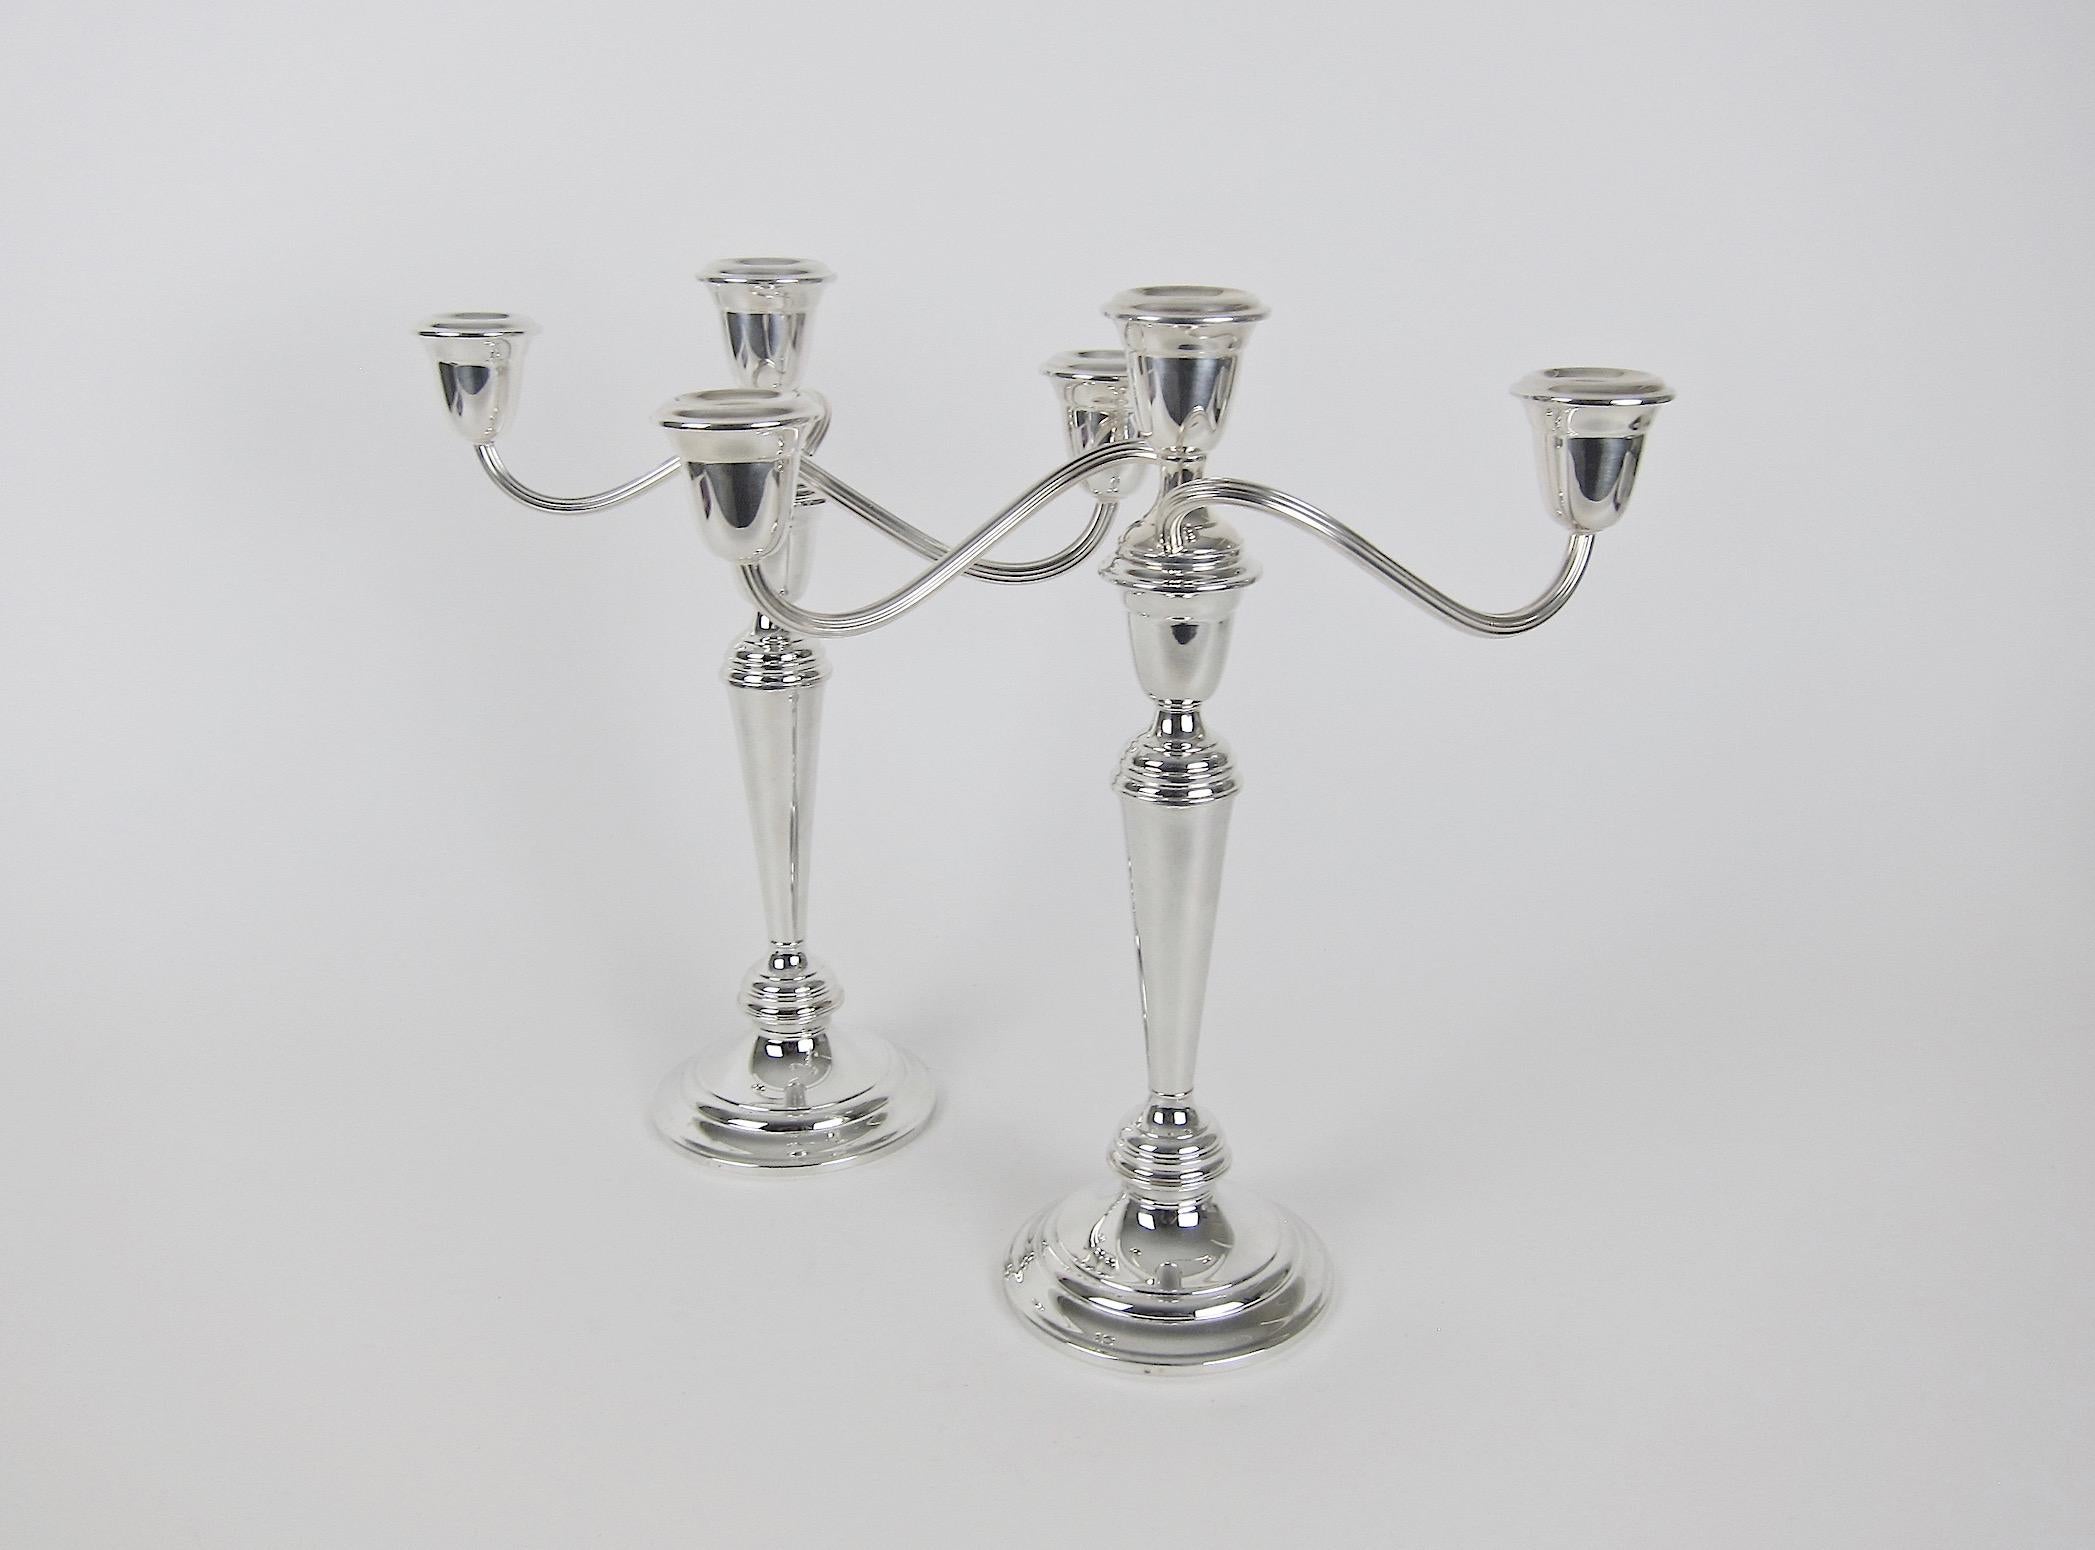 A vintage convertible three-light candelabra pair from Gorham Manufacturing Company of Providence, Rhode Island. The silver plated candleholders are each composed of four parts: a weighted circular base, a tapering stem, an urn, and reeded twisting